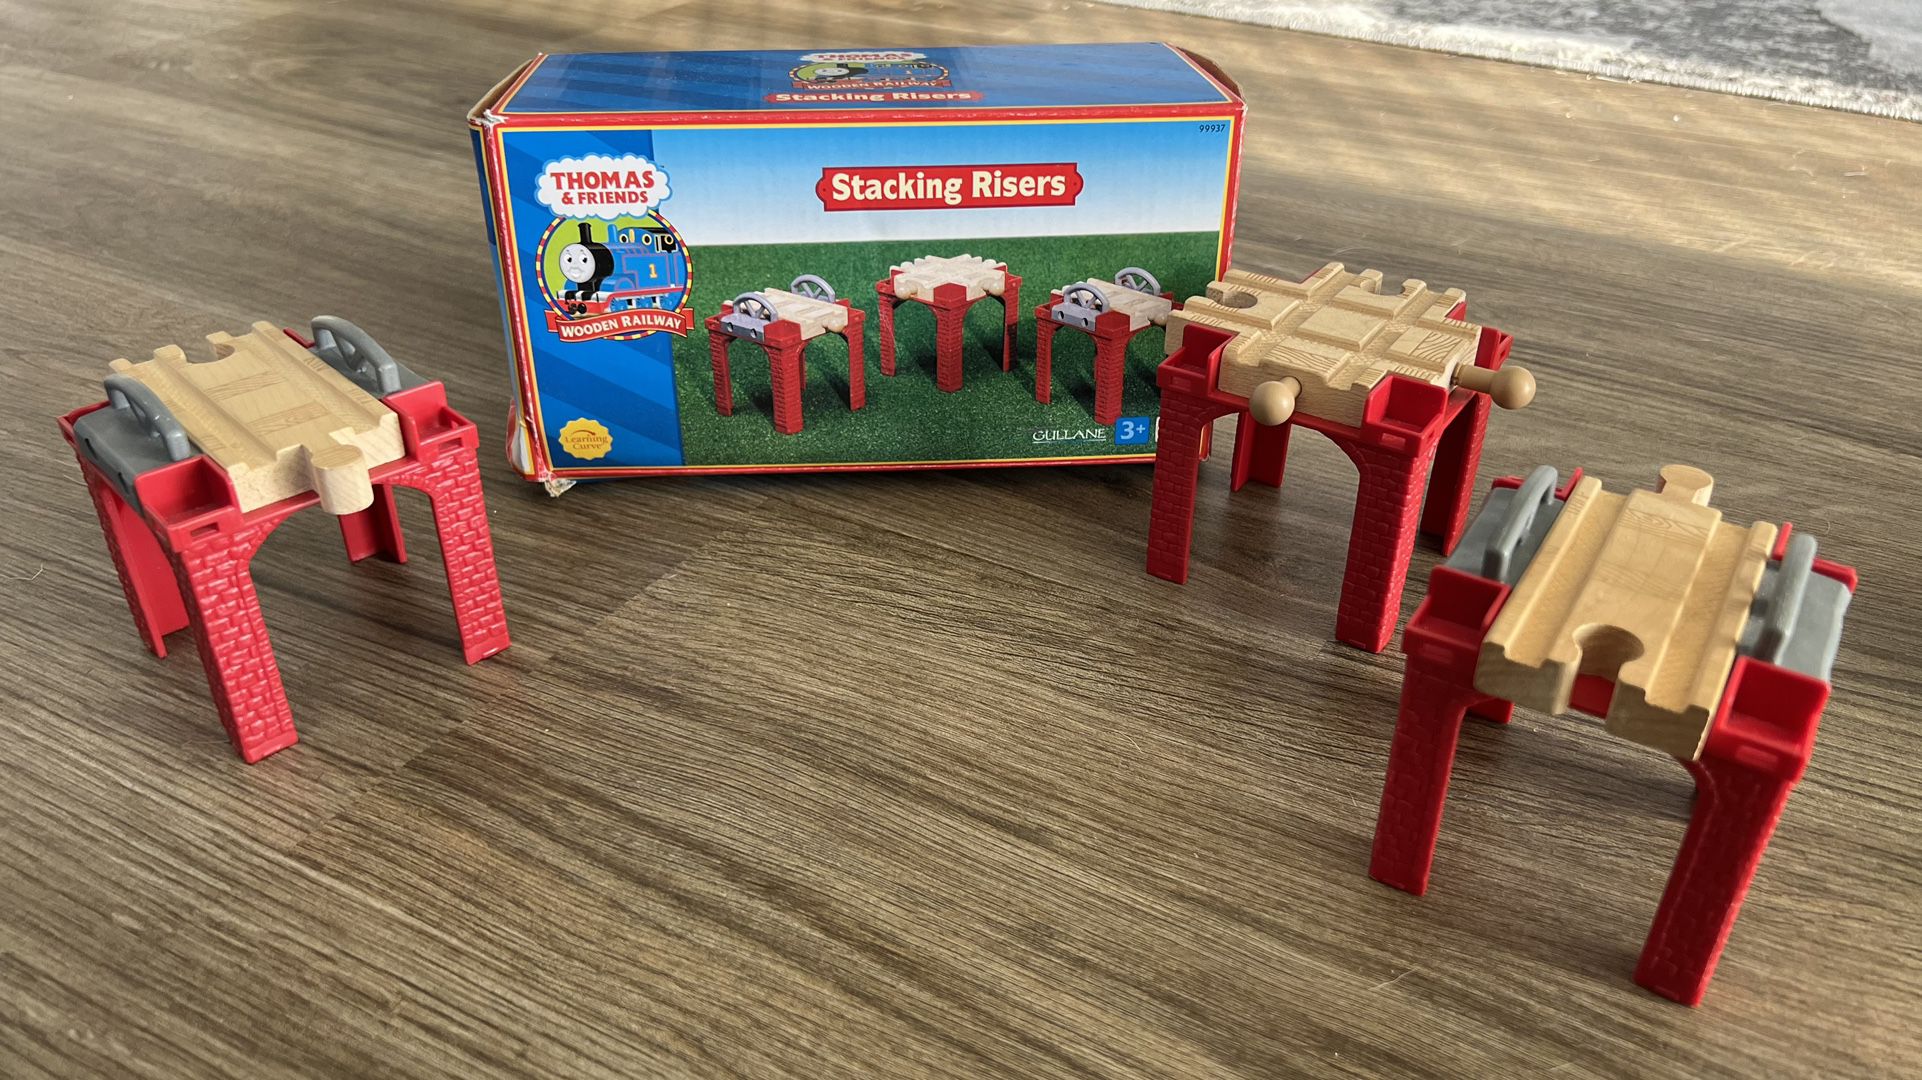 Vintage Thomas & Friends “Stacking Risers” Used With Original Box!!!!!